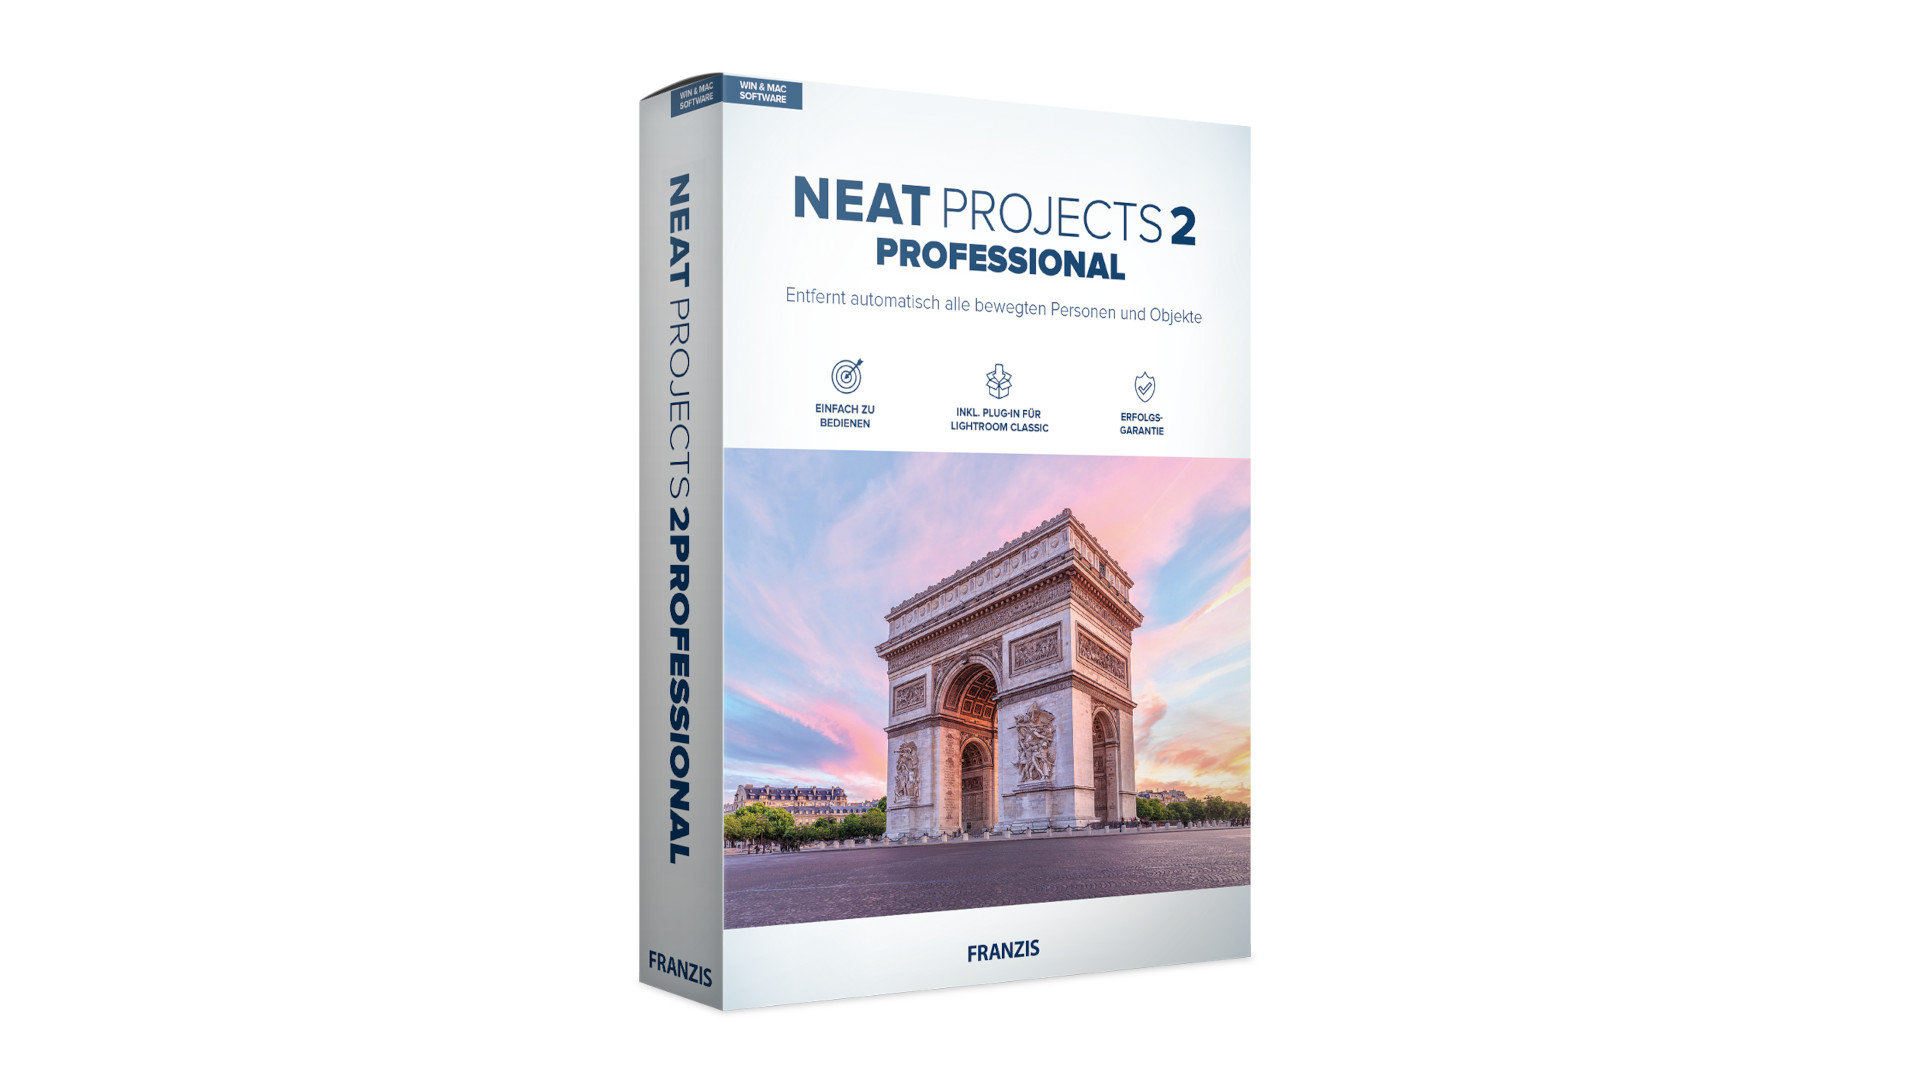 NEAT projects 2 Pro - Project Software Key (Lifetime / 1 PC), $33.89